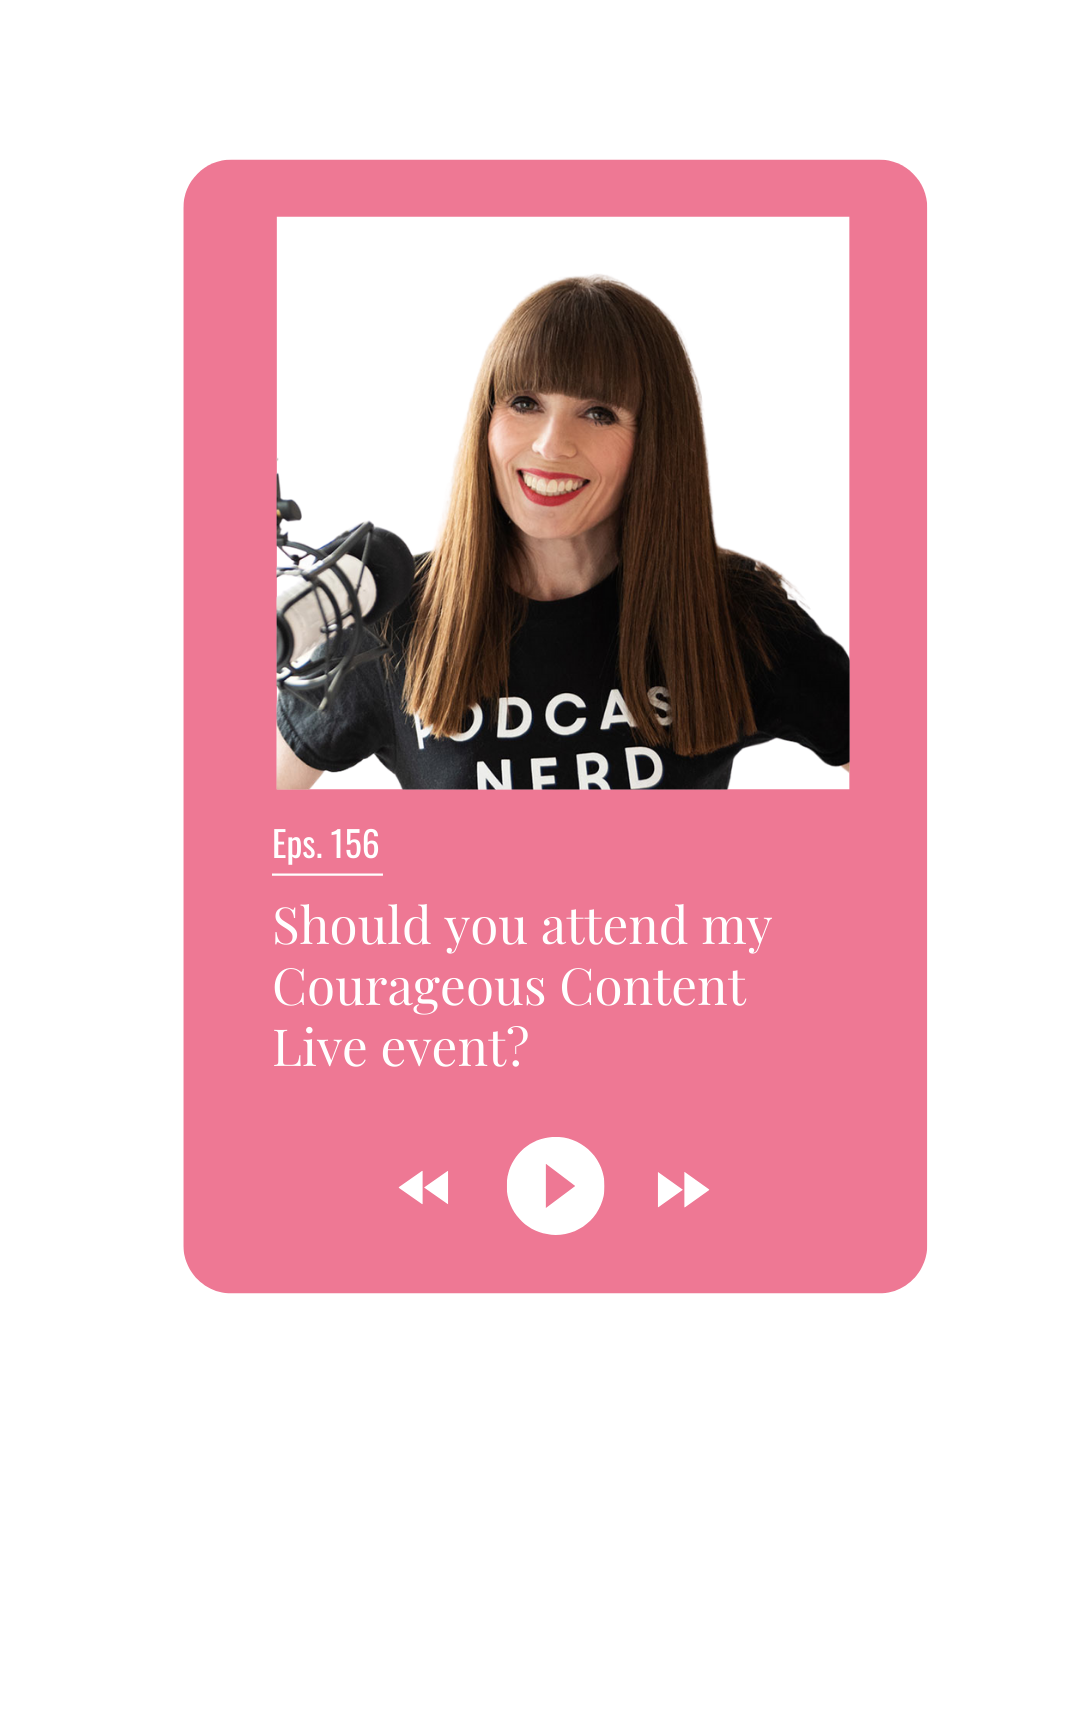 Should you attend my Courageous Content Live event?